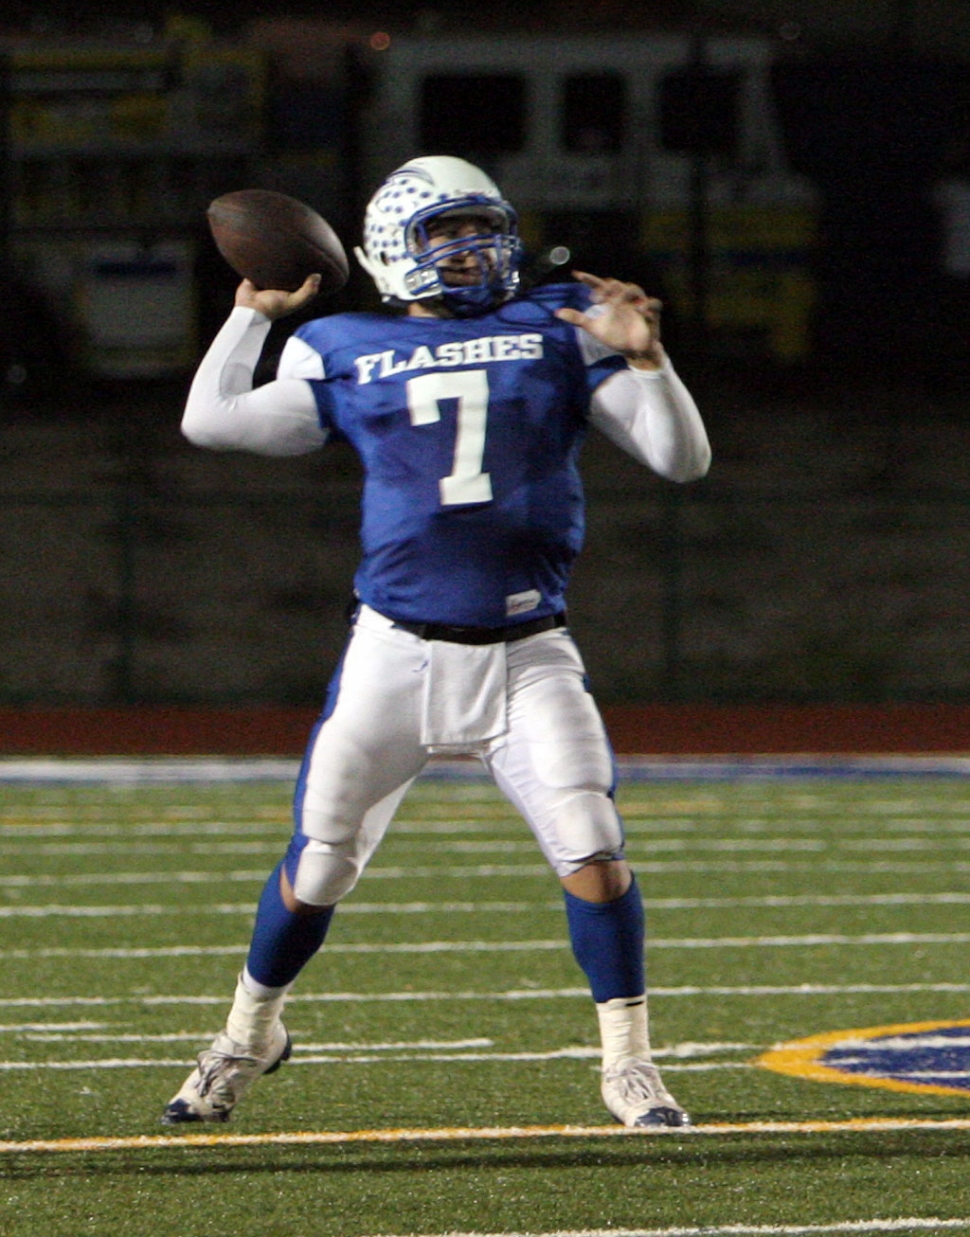 Nathan Ibarra #7 threw for over 100 yards against Santa Paula. Fillmore lost to the Cardinals 34-14.